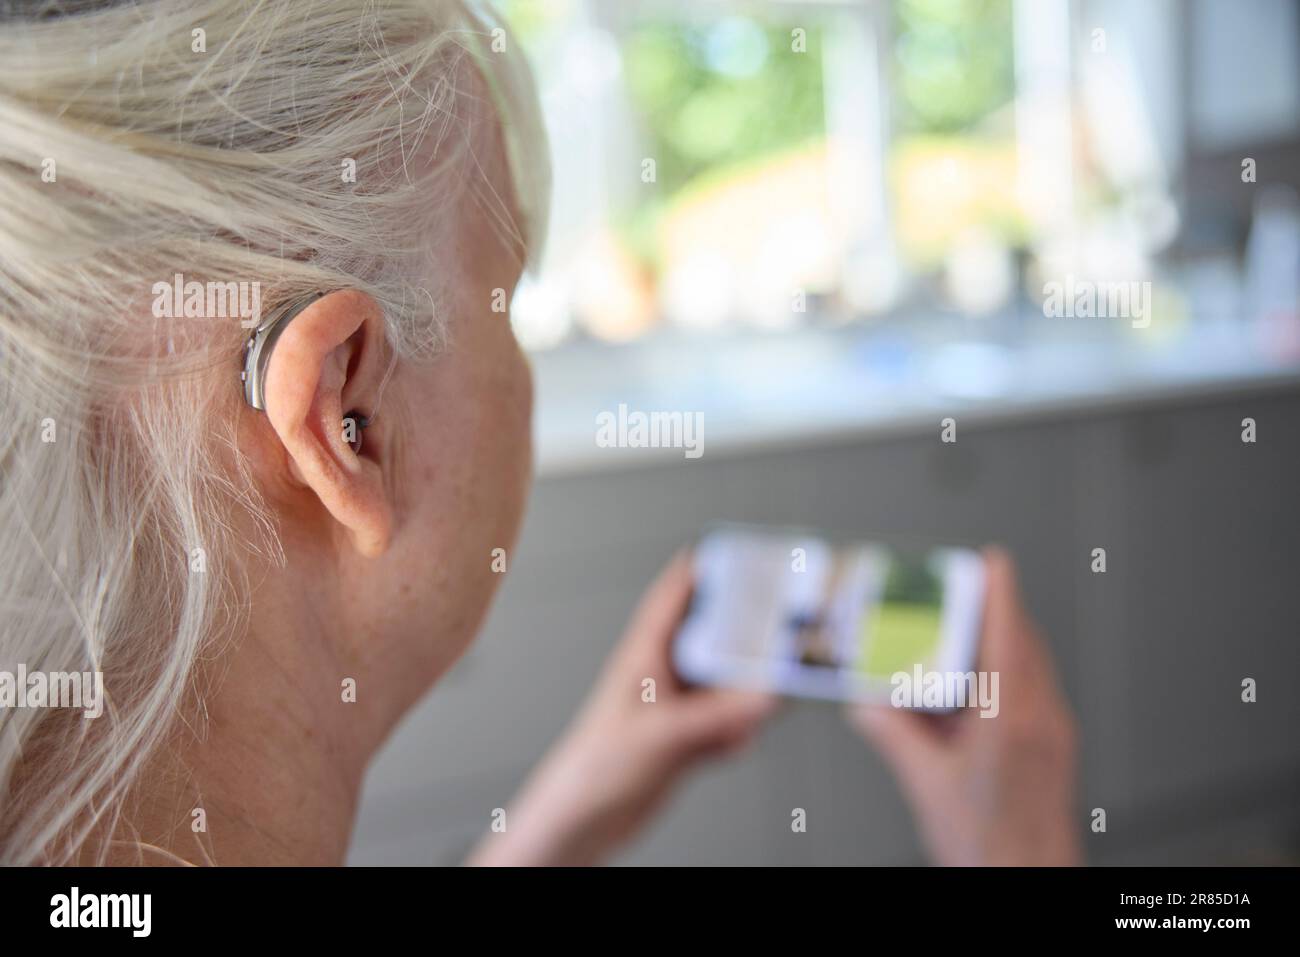 Close Up Of Senior Woman Wearing Behind The Ear Hearing Device Or Aid Sreaming From Mobile Phone At Home Stock Photo